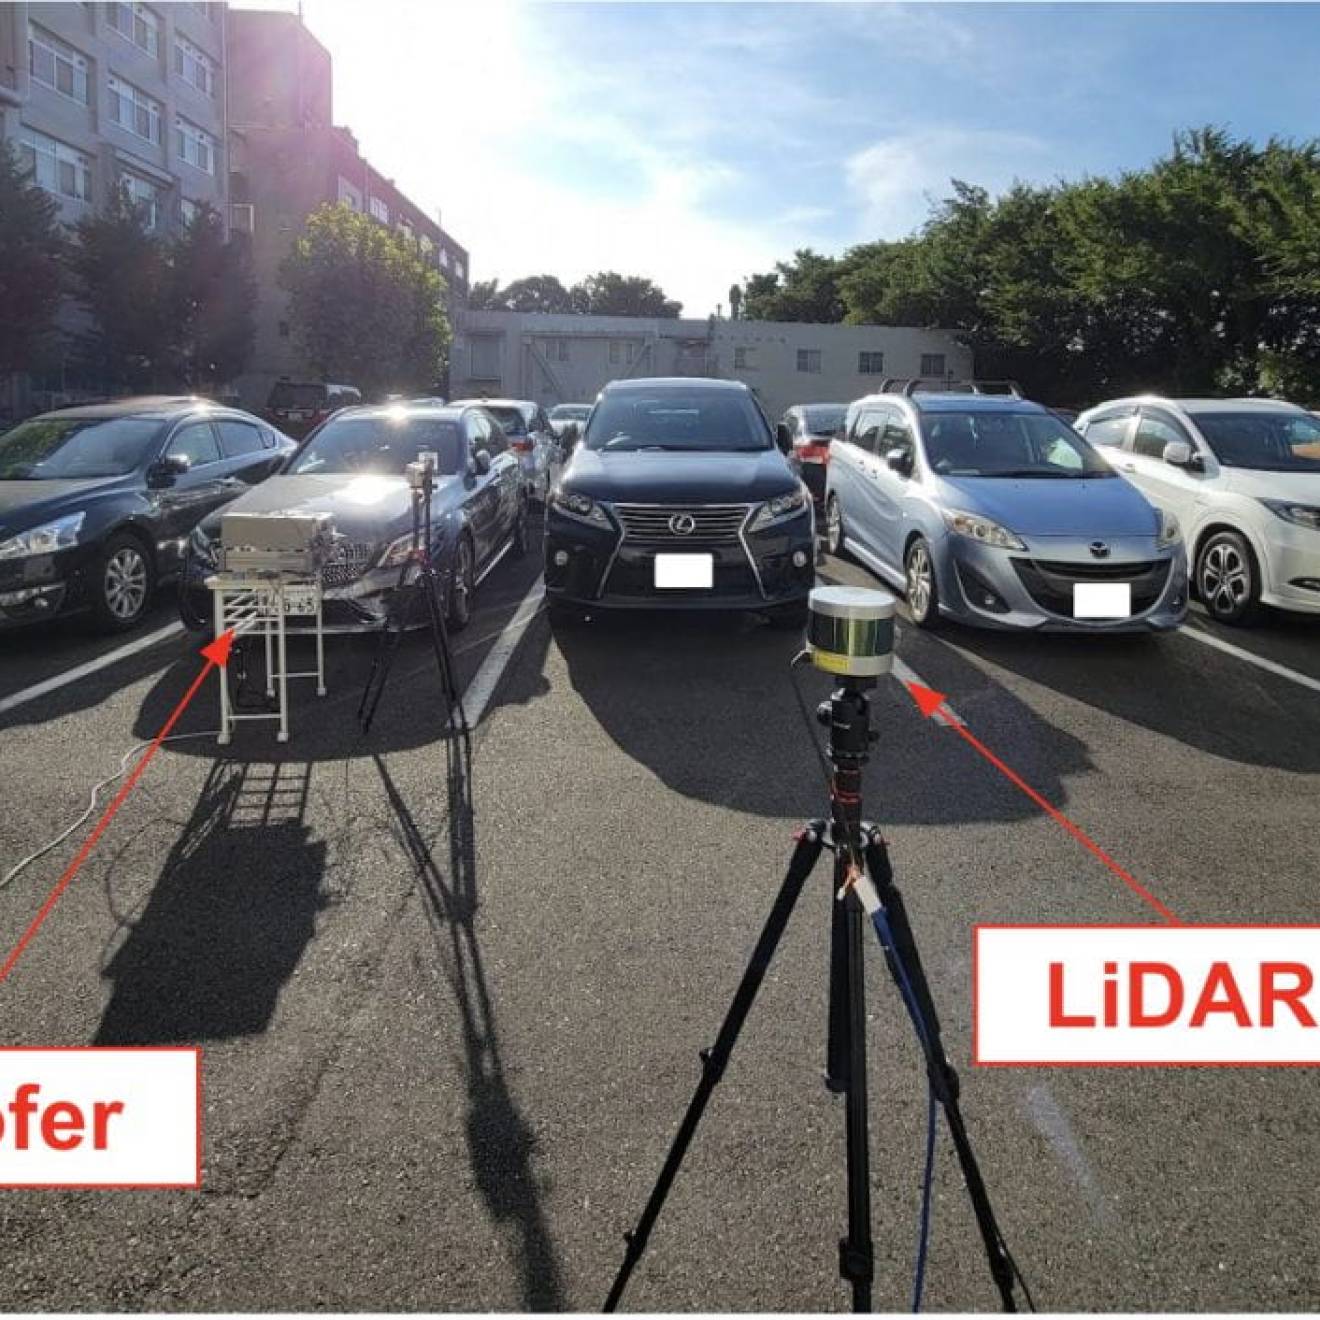 A row of parked cars with a LiDAR on a tripod and another object that looks like a grill, known as a spoofer, directly in front of a car